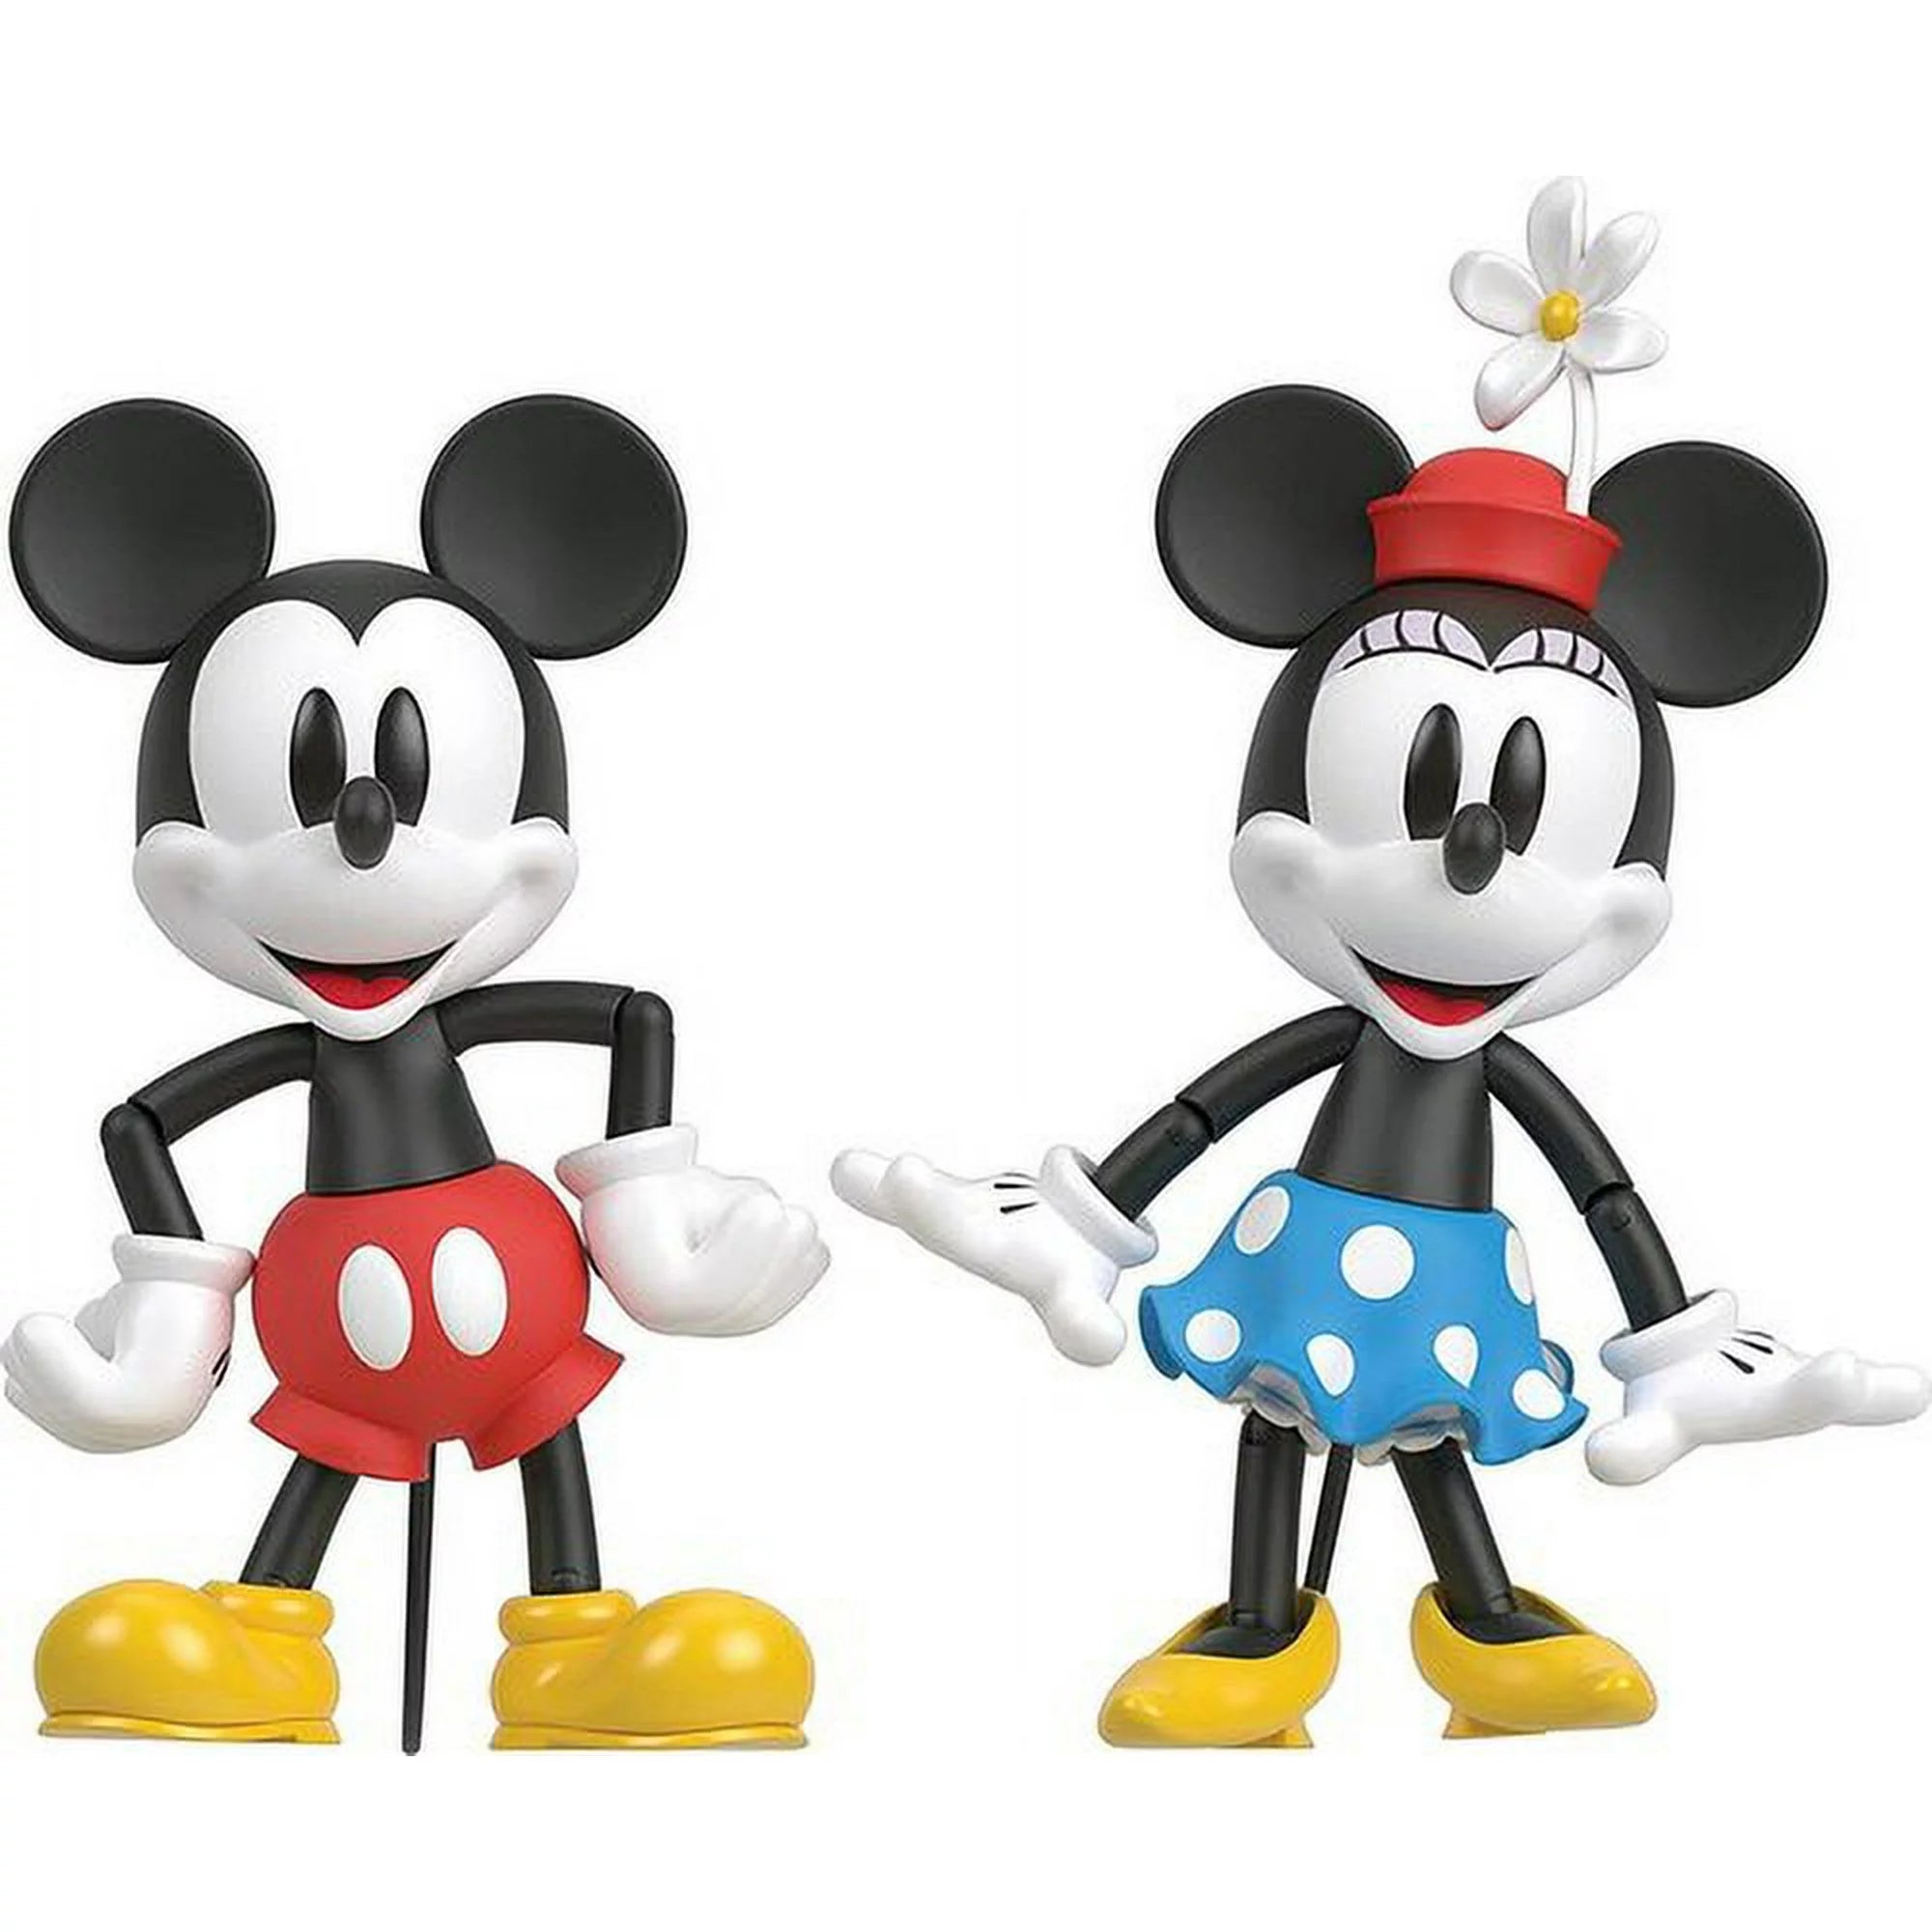 Disney 100th Anniversary Mickey & Minnie Mouse Figure Two-Pack